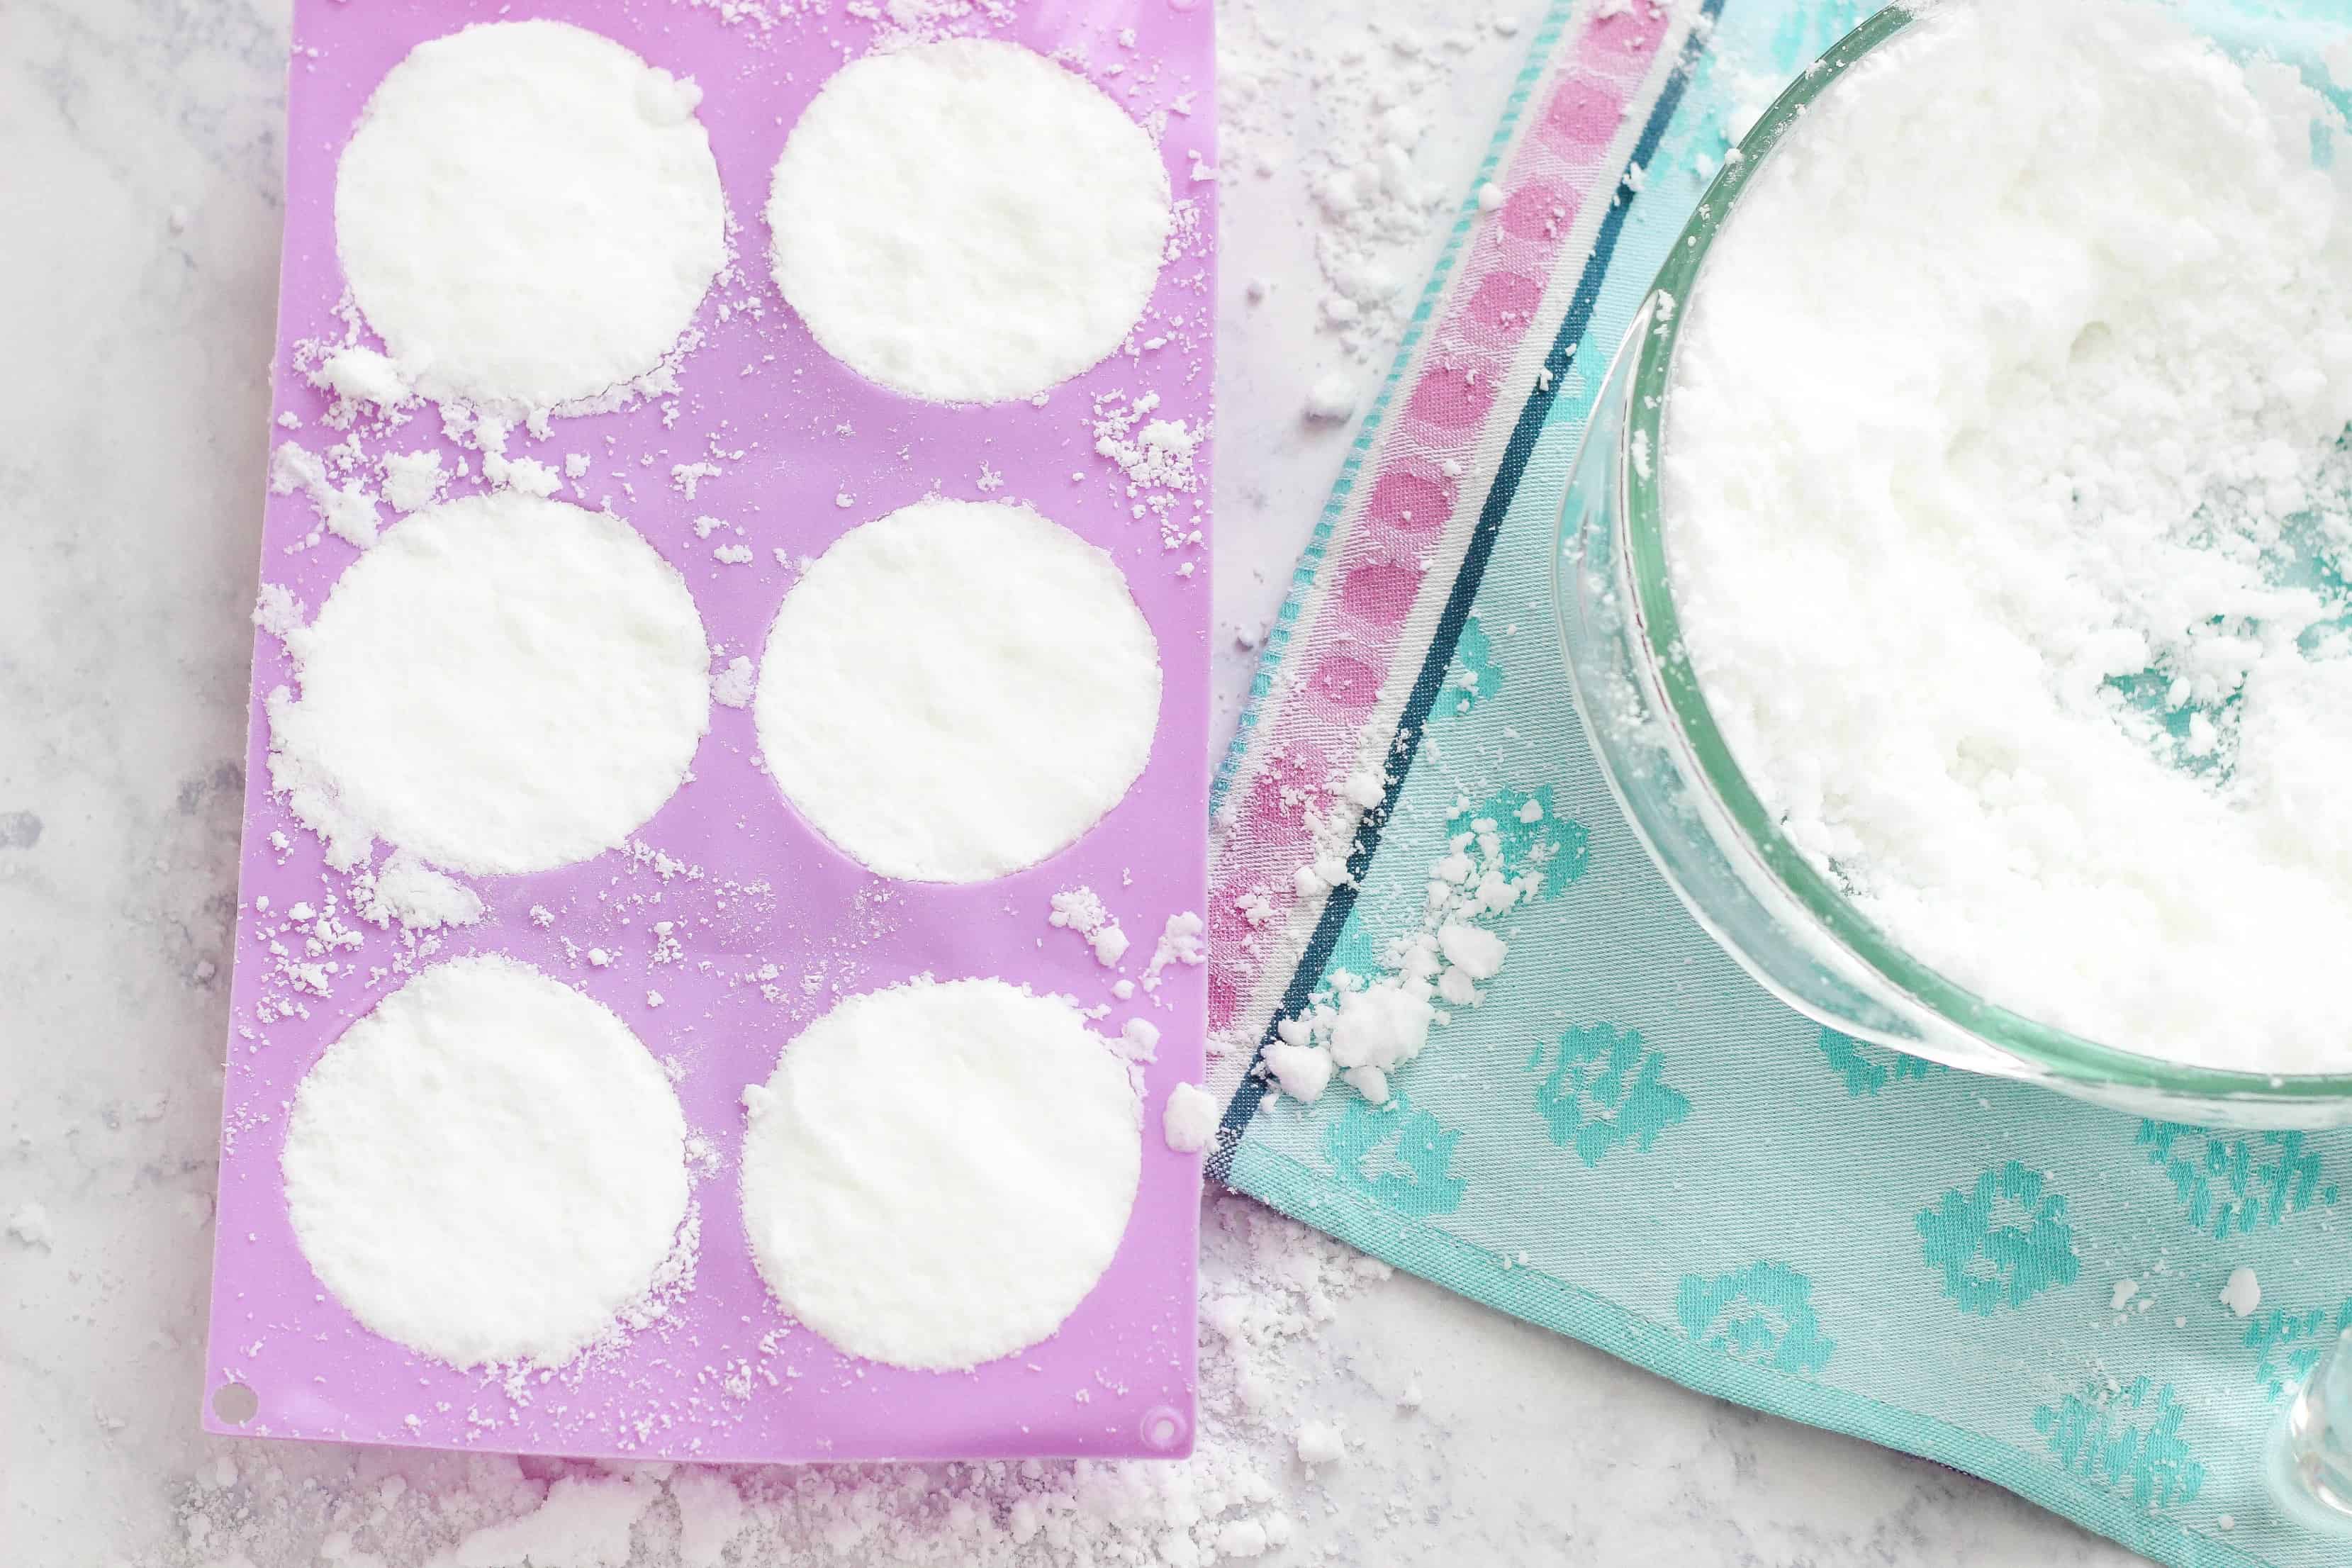 Easily make these DIY Floral Bath Bombs at home with this recipe and video tutorial.  These homemade bath bombs create a relaxing spa-like bath experience and make great gifts! #bathbombs #diybathbombs #bathbombrecipe #soap #healthandbeauty